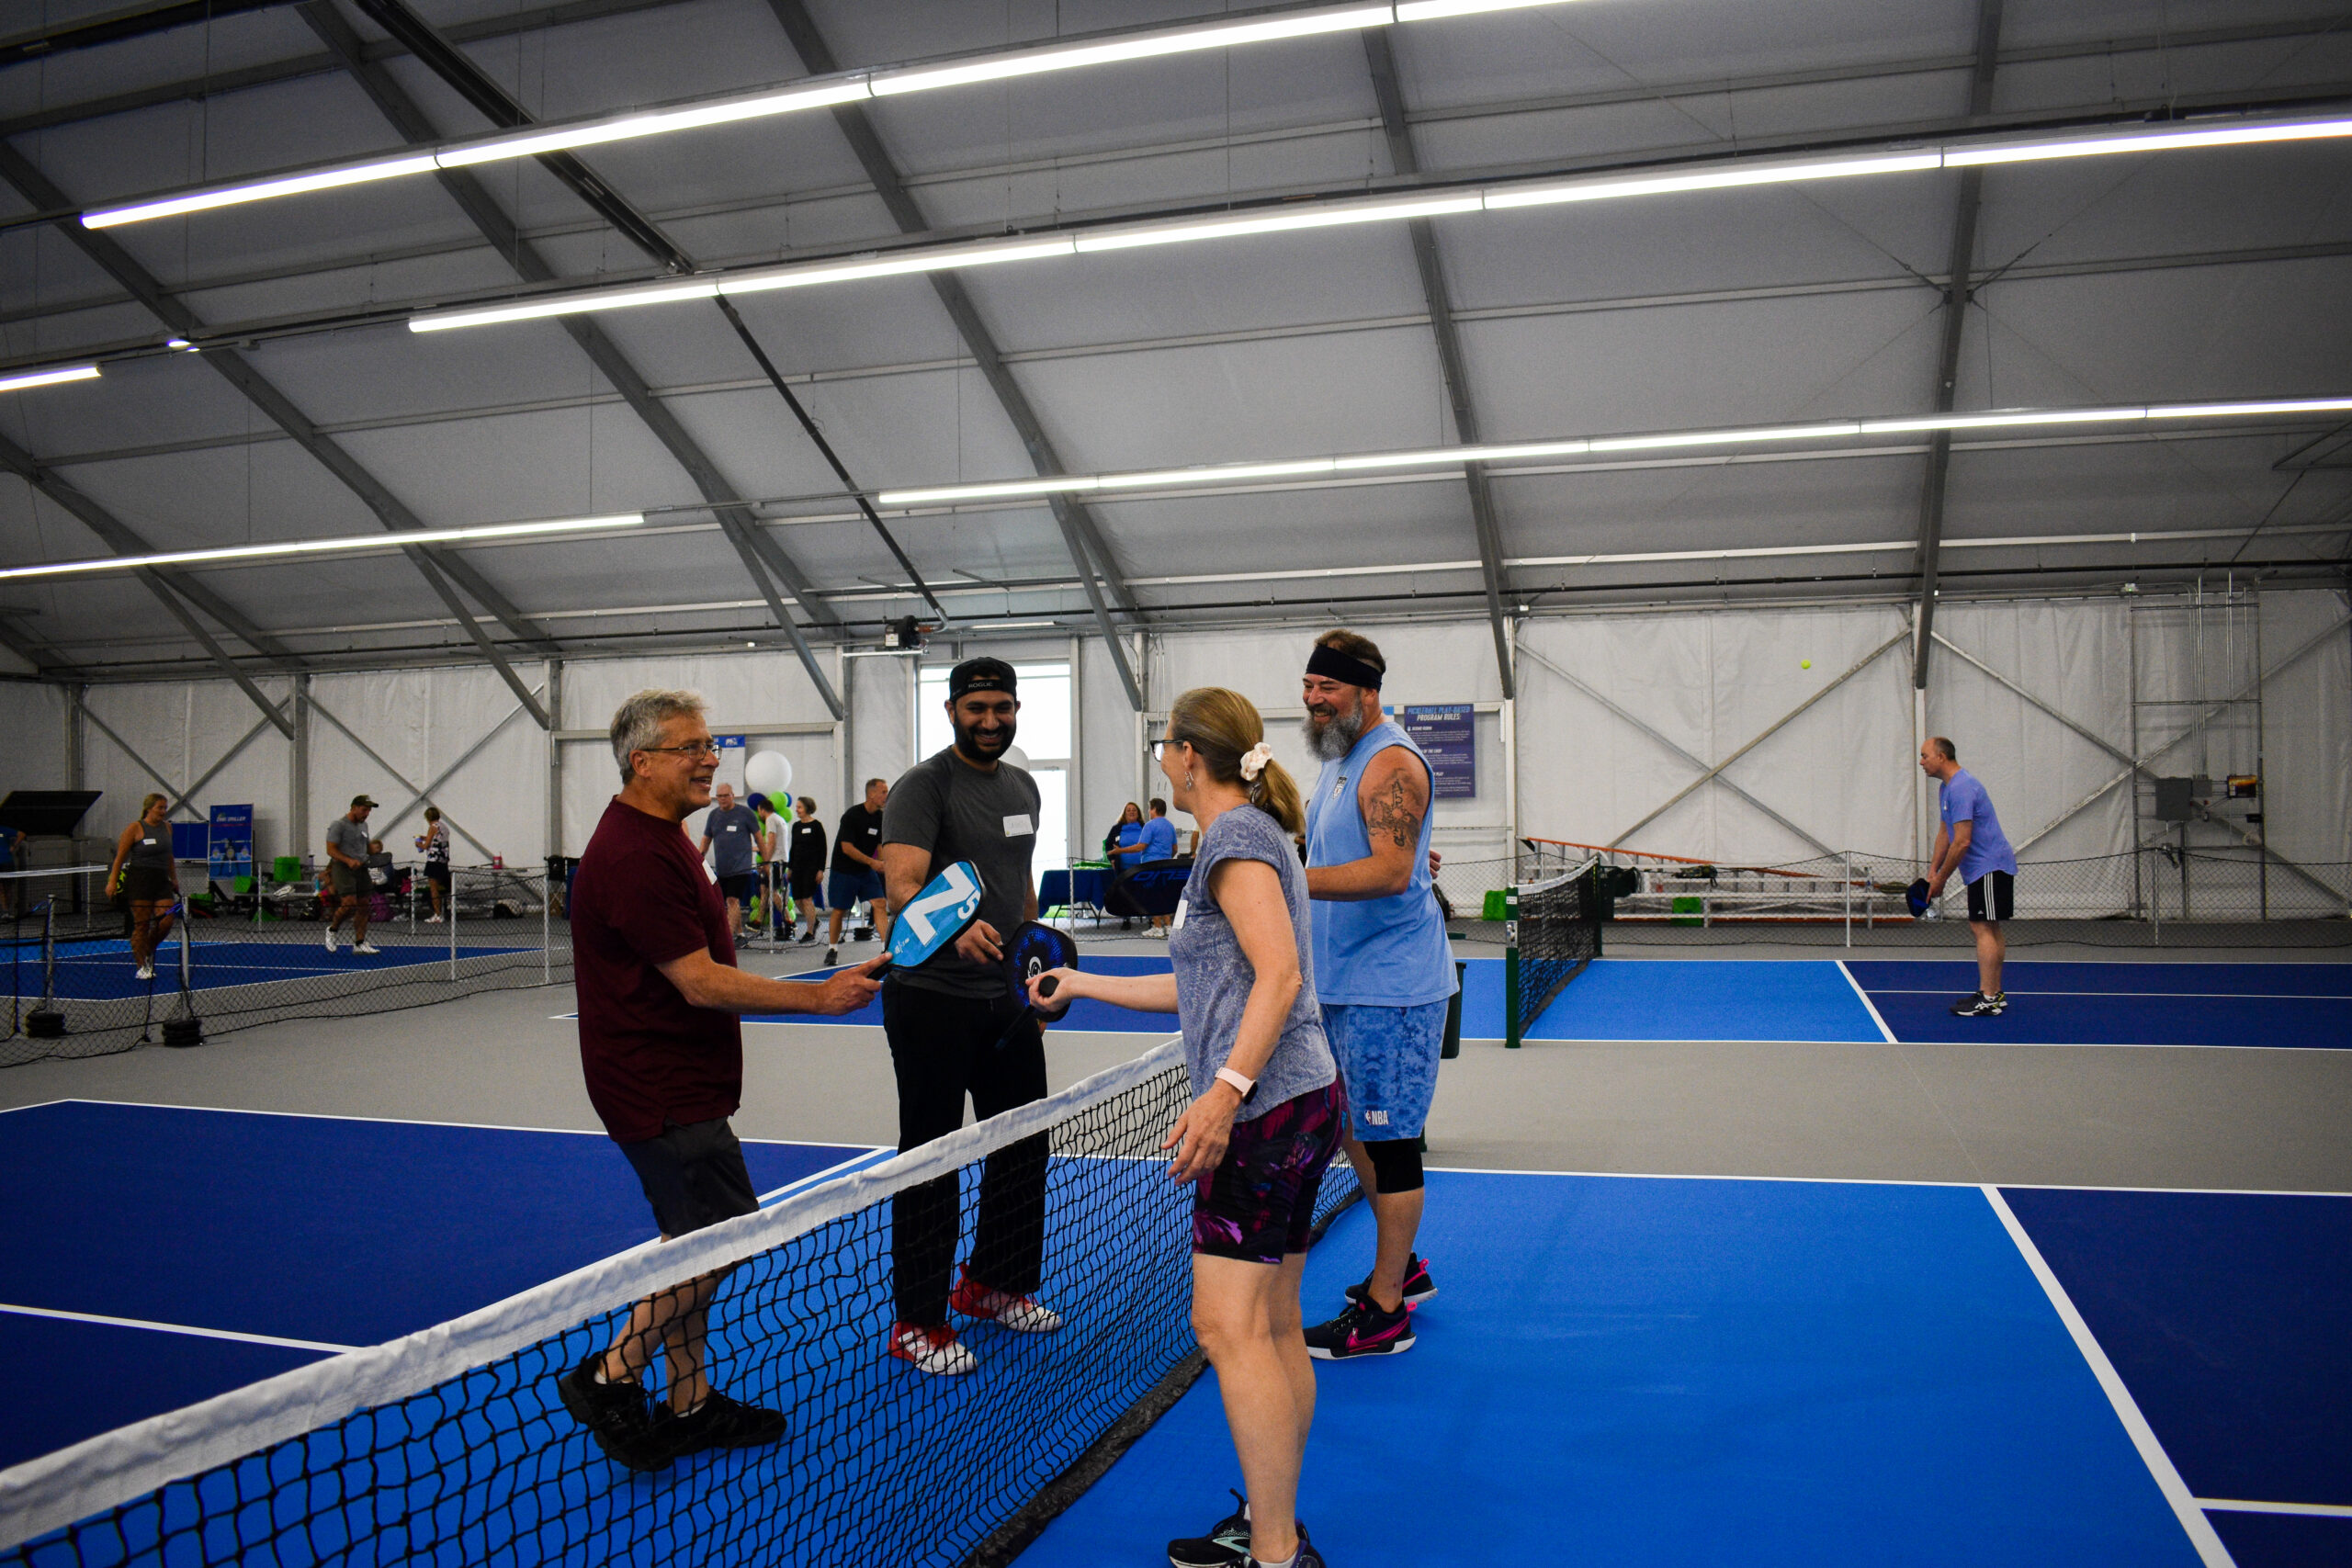 Wheaton Sport Center people playing pickleball in new Pickleball Pavilion